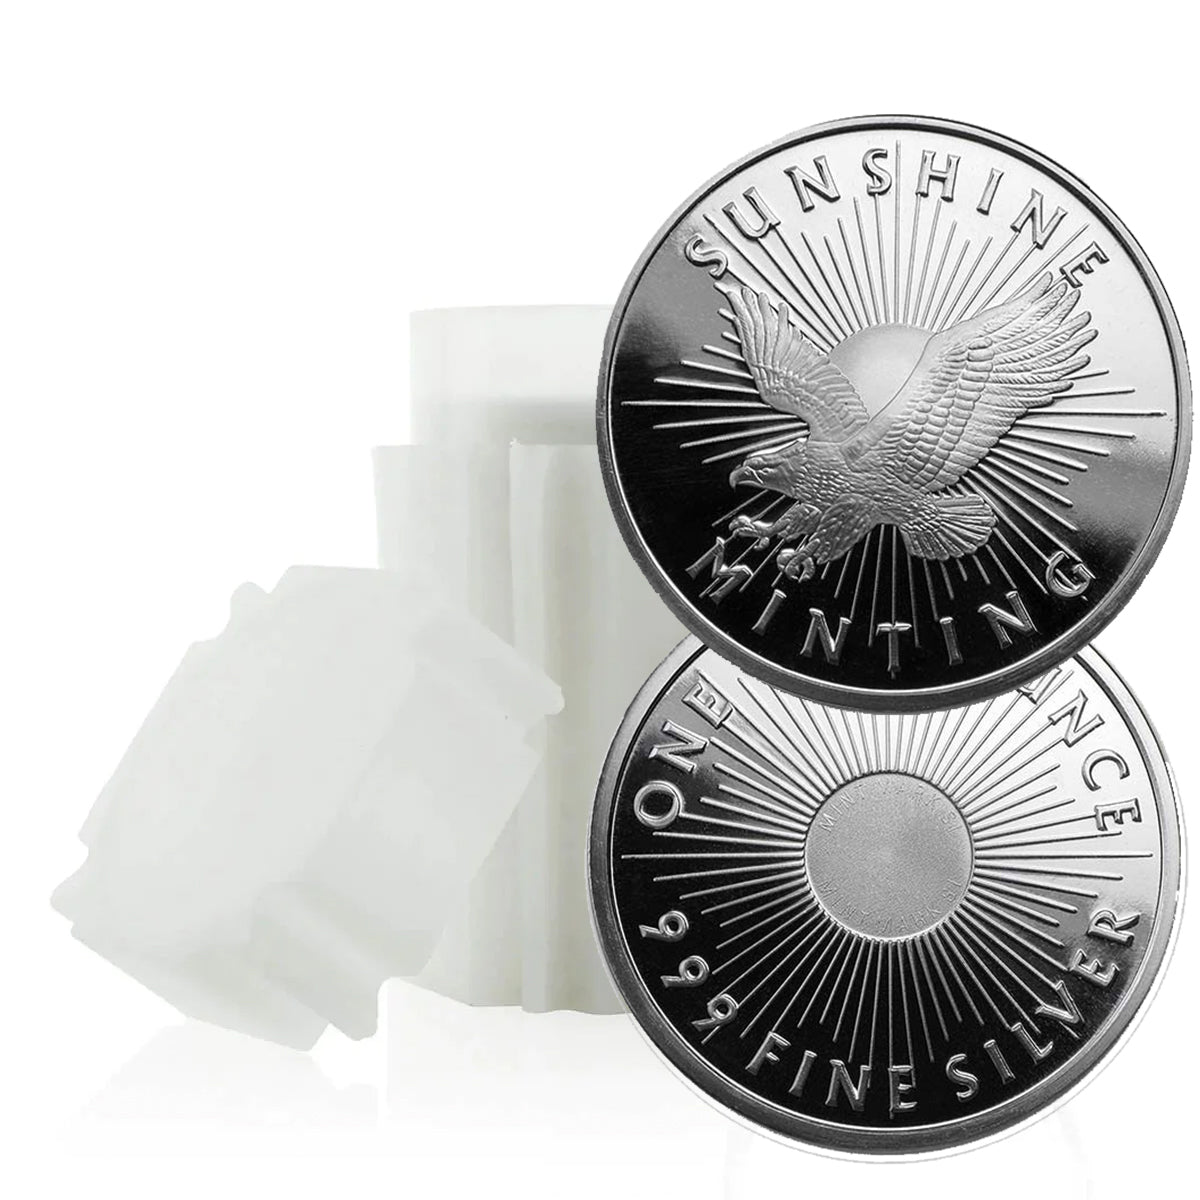 Tube of Sunshine Mint 1 oz Silver Rounds (20 Rounds) (Secondary Market)